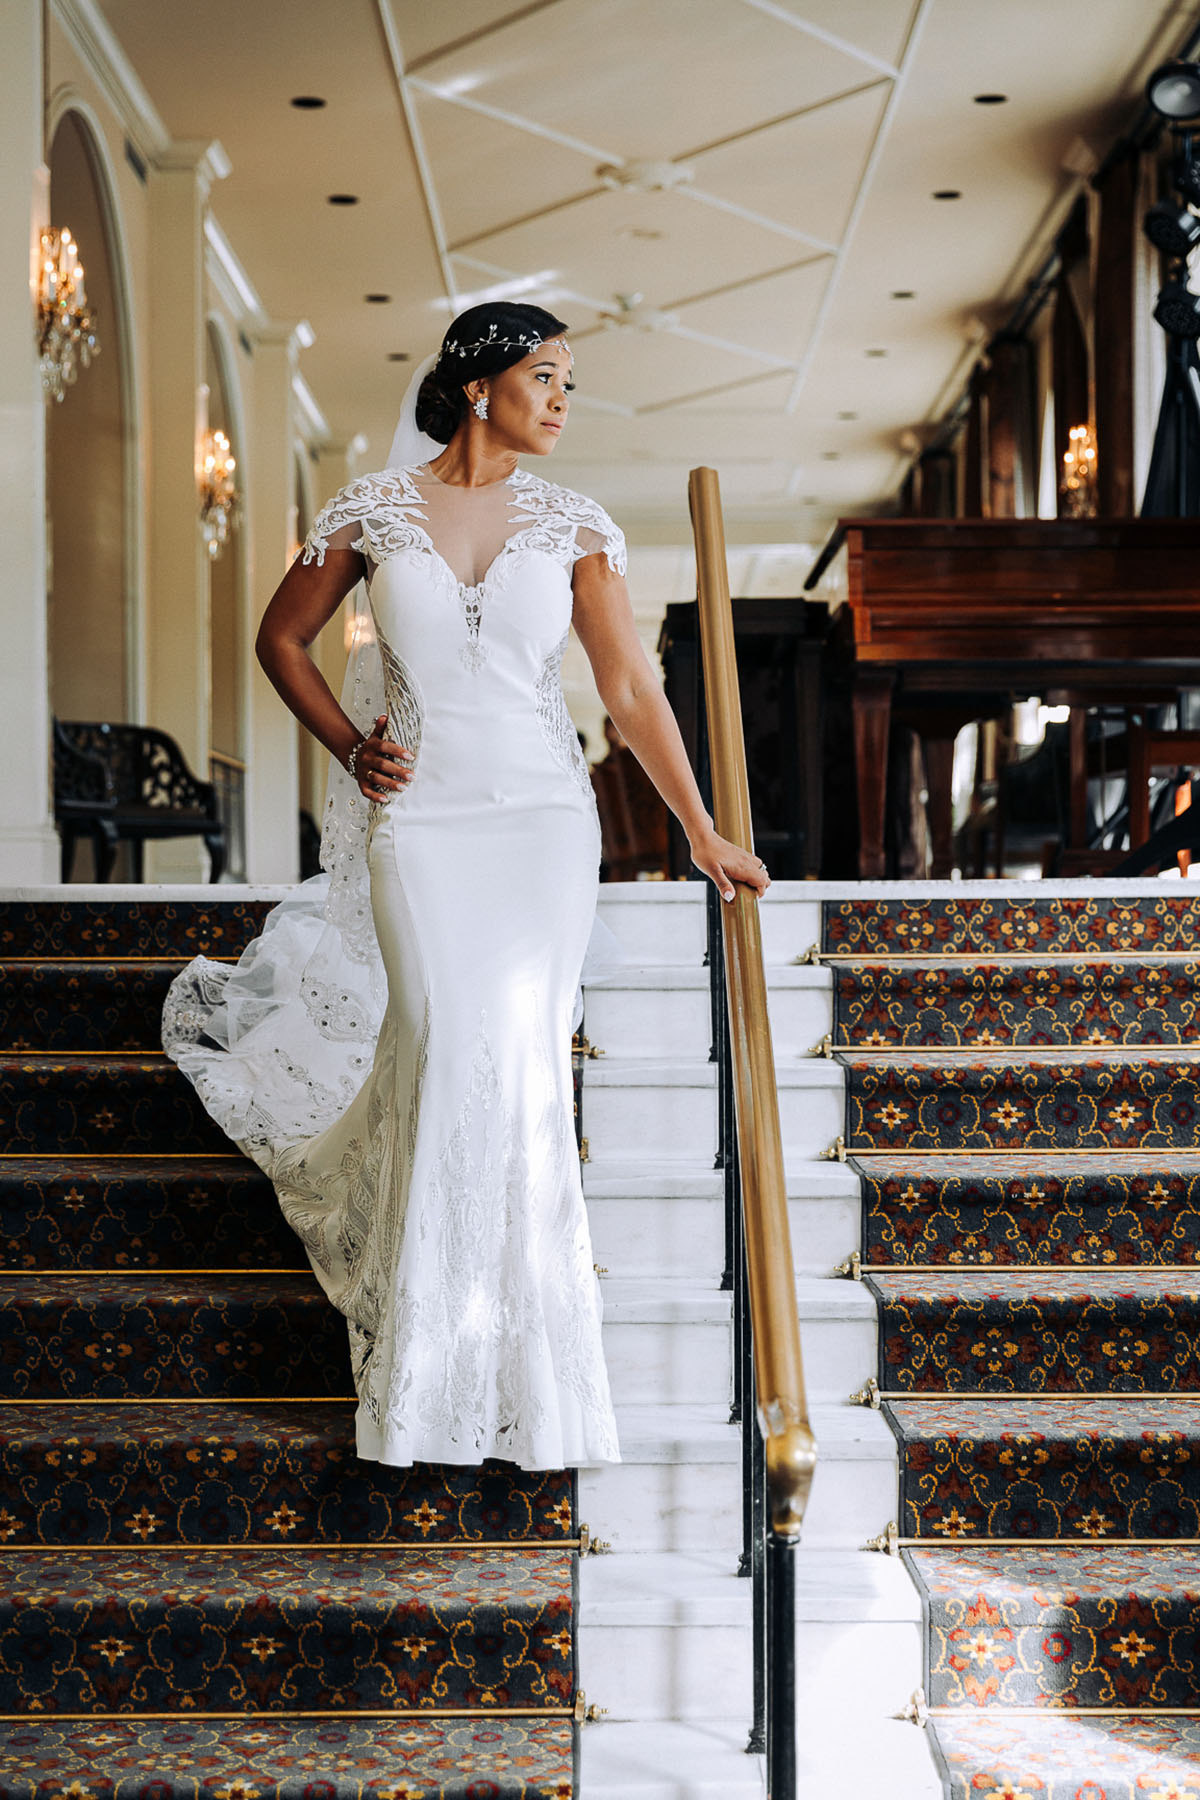 A bride poses for a photo in the lobby of the Omni Royal Orleans Hotel. Photo: Capture Studio Photography